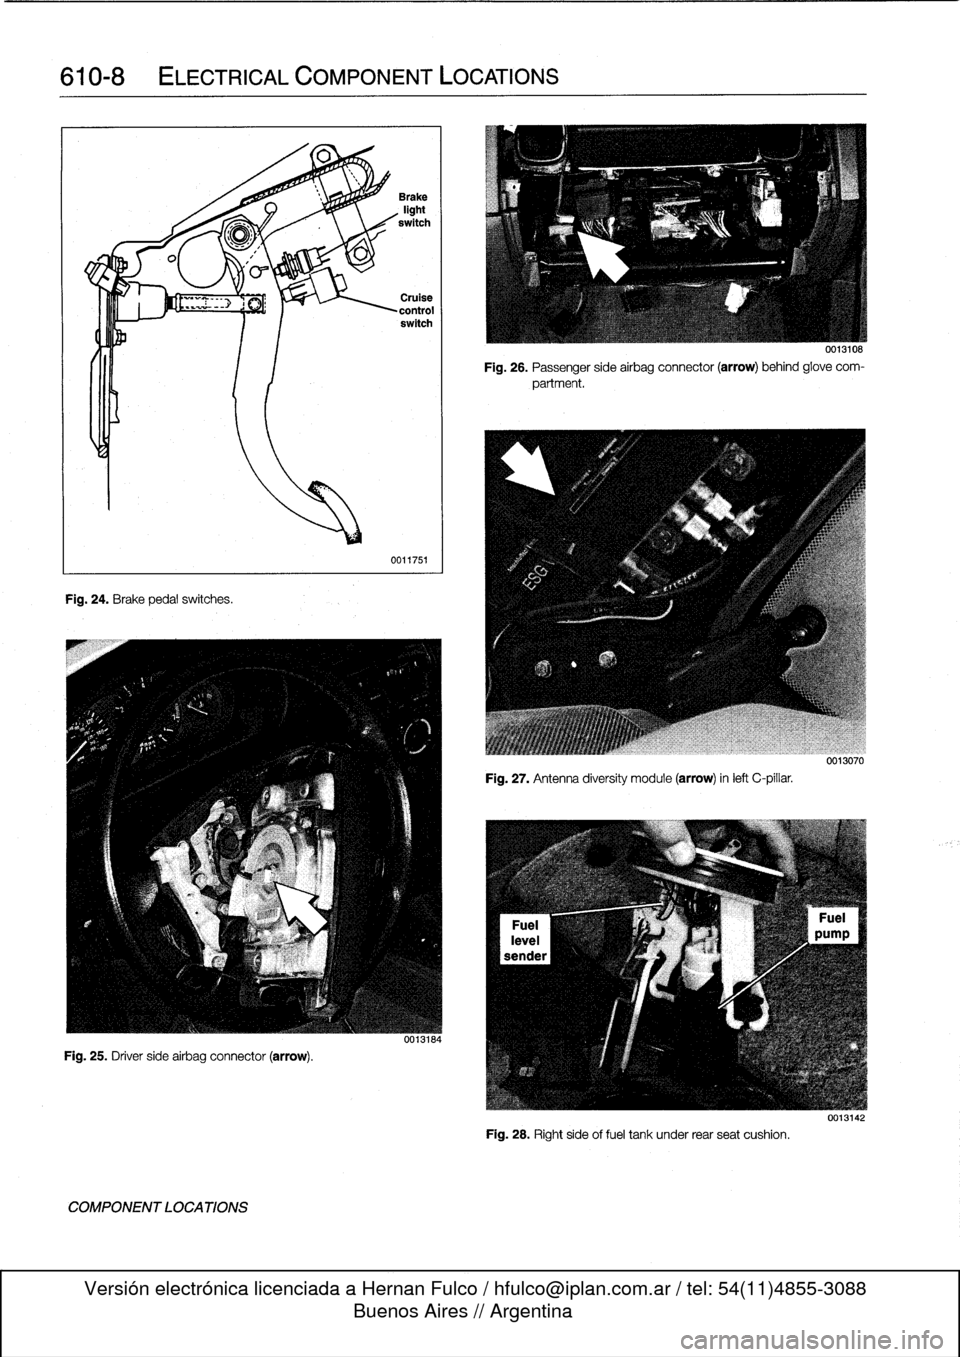 BMW 325i 1996 E36 User Guide 
610-$

	

ELECTRICAL
COMPONENT
LOCATIONS

Fig
.
24
.
Brake
pedalswitches
.

Fig
.
25
.
Driver
side
airbag
connector
(arrow)
.

COMPONENT
LOCATIONS

0011751

Fig
.
26
.
Passenger
sideairbag
connector
